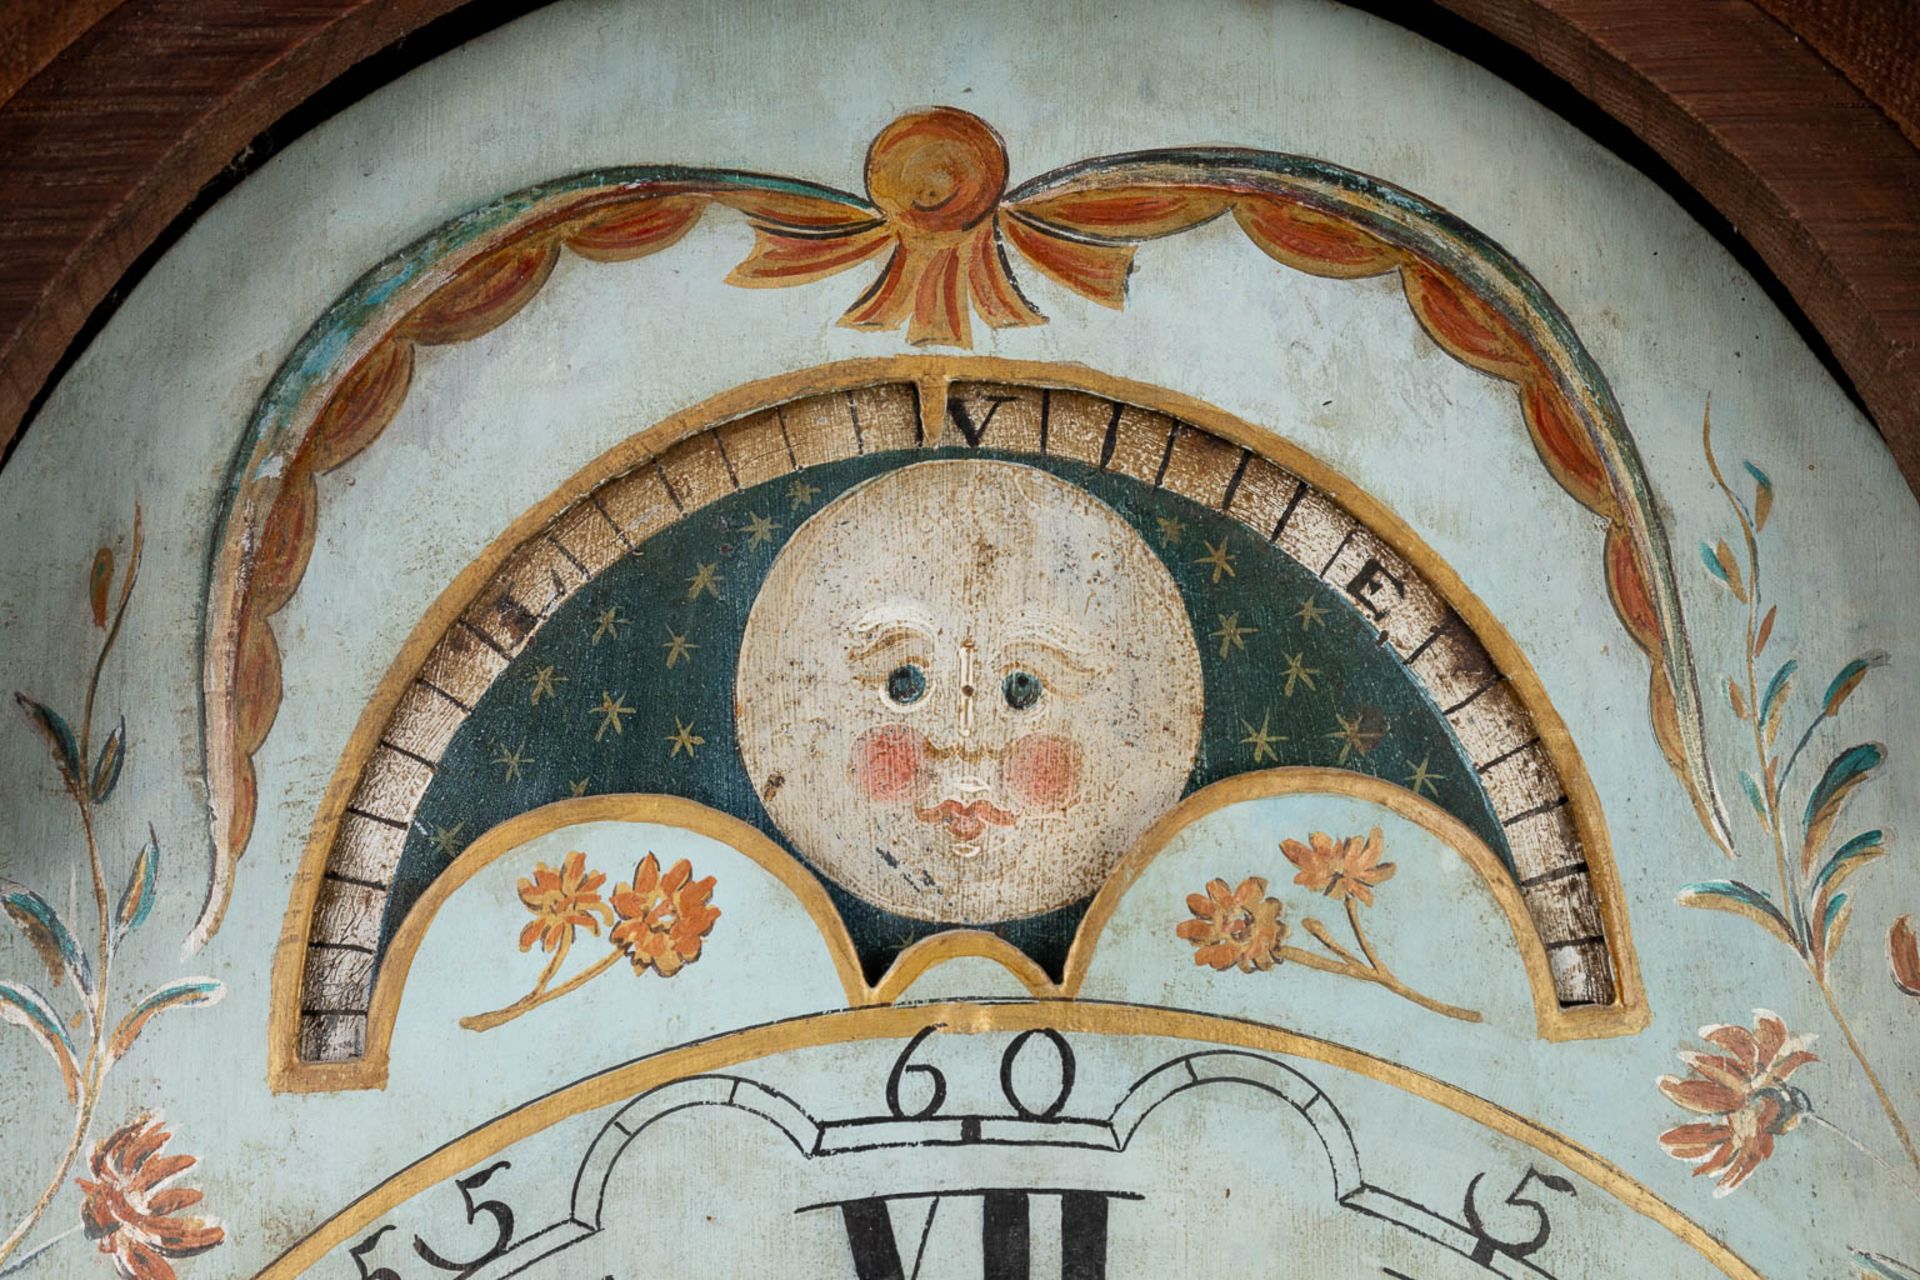 An antique clock, made in Friesland, The Netherlands. 19th C. (L:23 x W:46 x H:153 cm) - Image 11 of 16